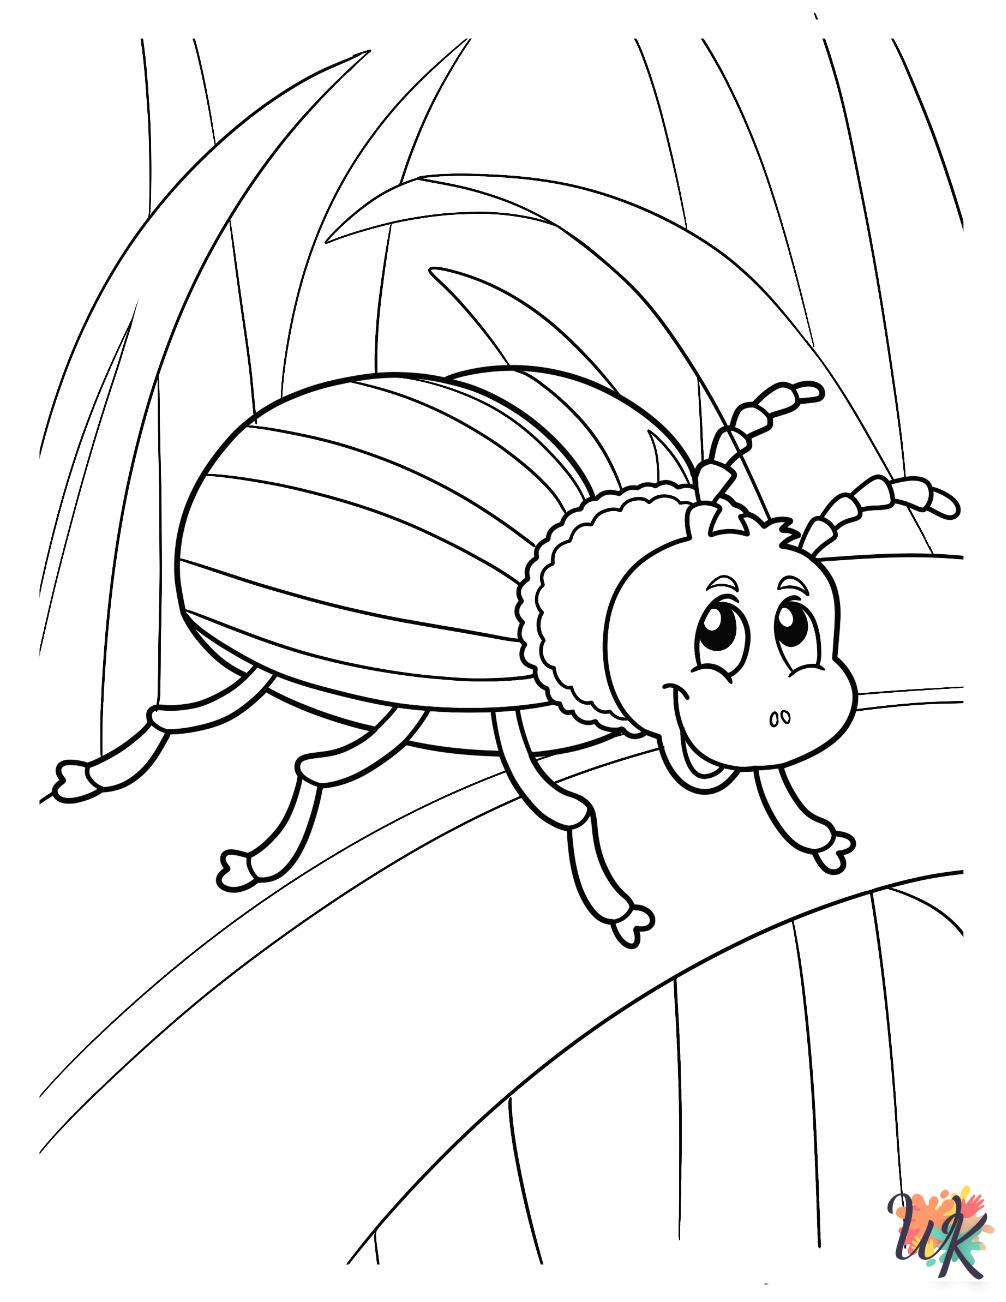 Beetle coloring pages for adults